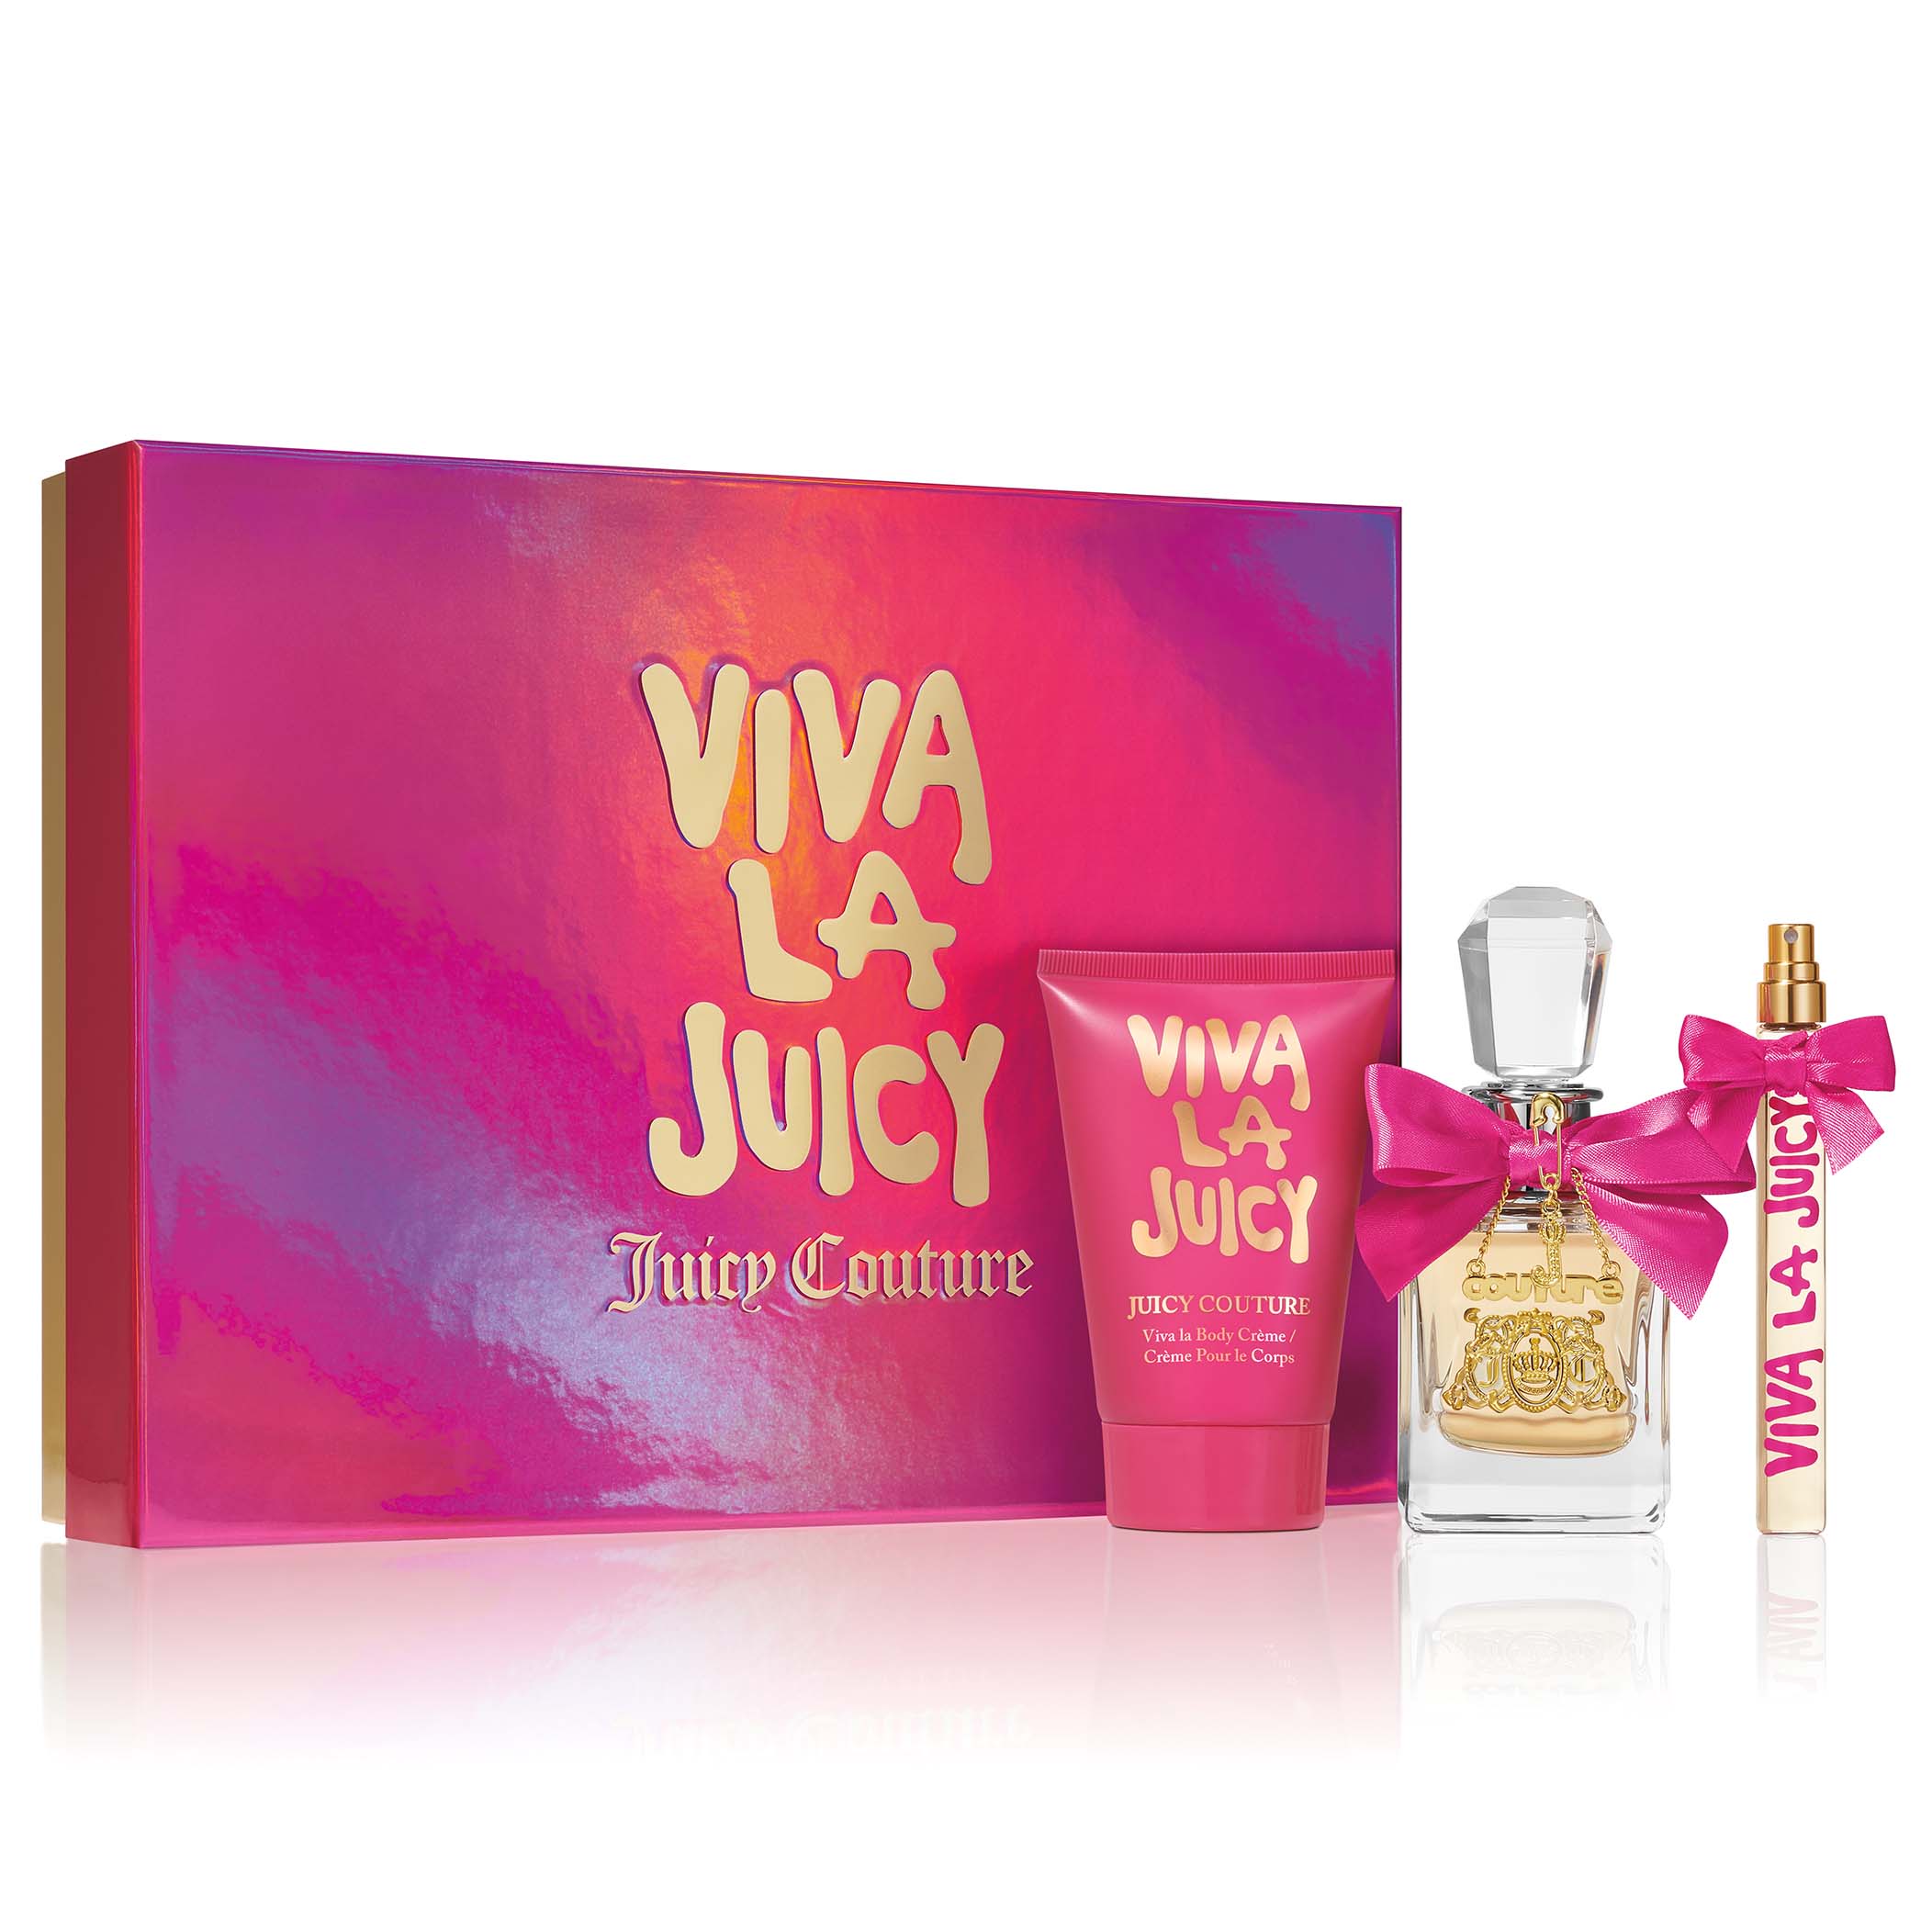 Juicy Couture Beauty Cyber Monday 2022 Beauty Deals & Sales | Chic moeY